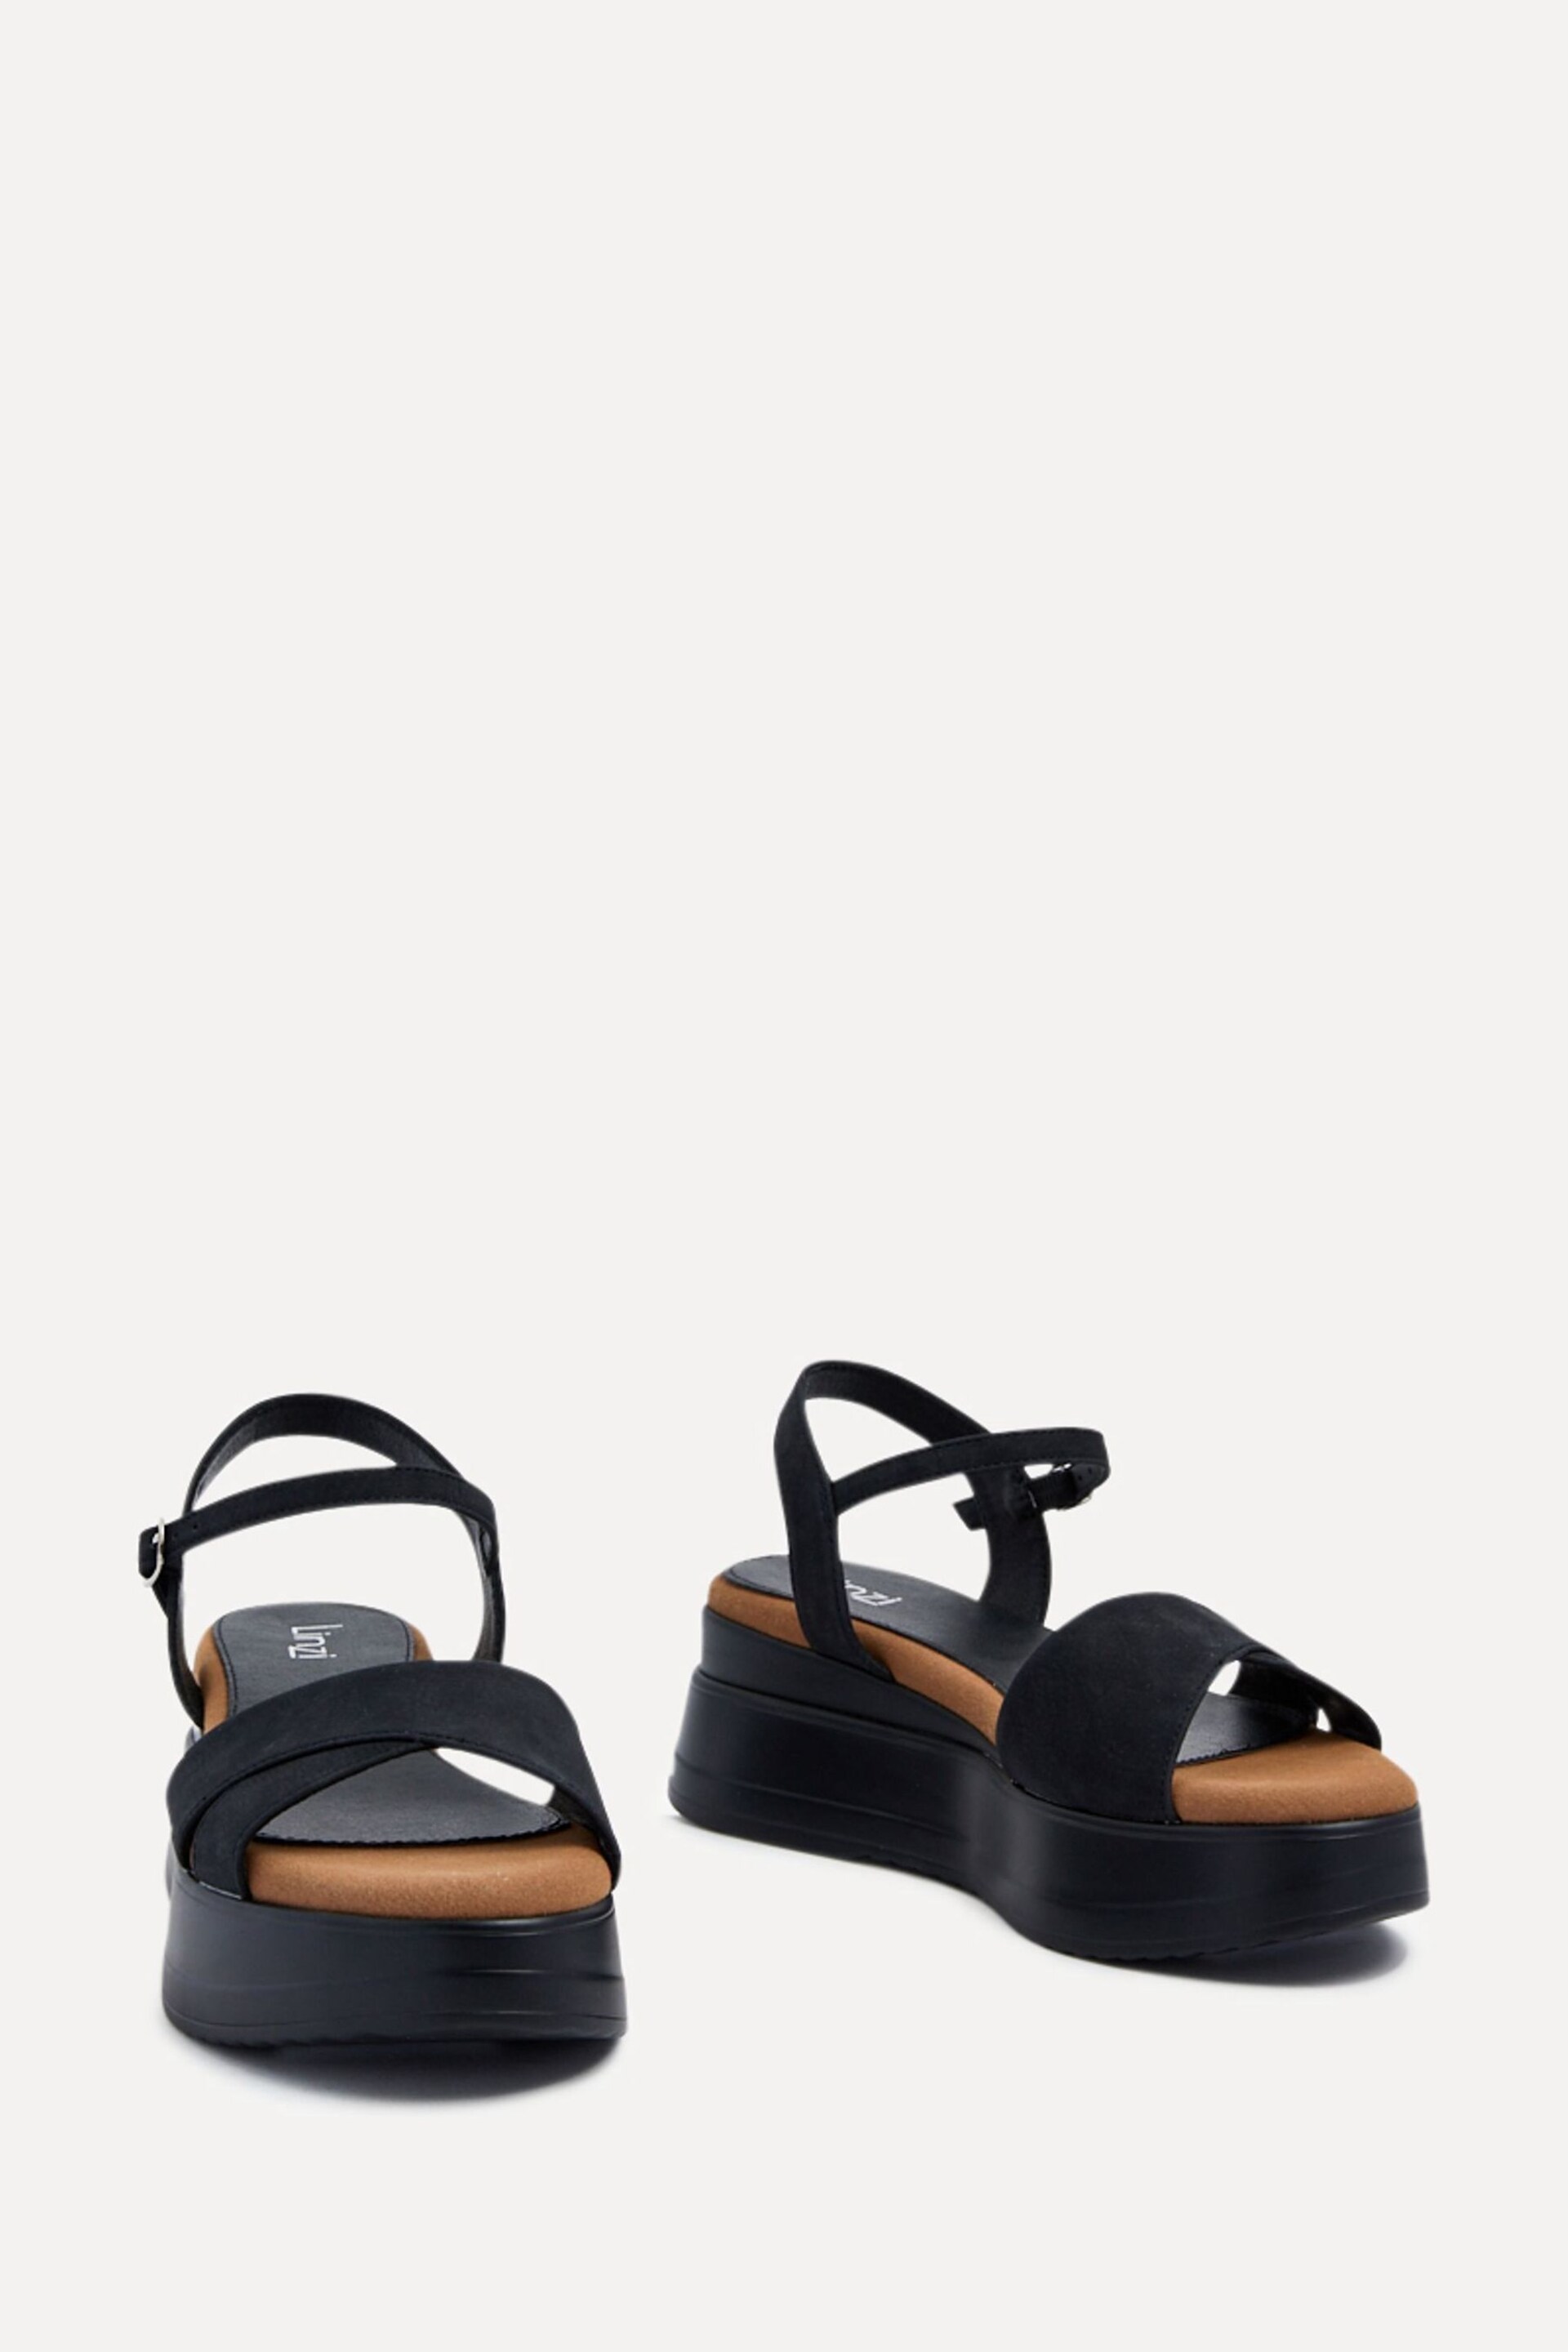 Linzi Black Maple Crossover Sandals With Ankle Strap - Image 3 of 5